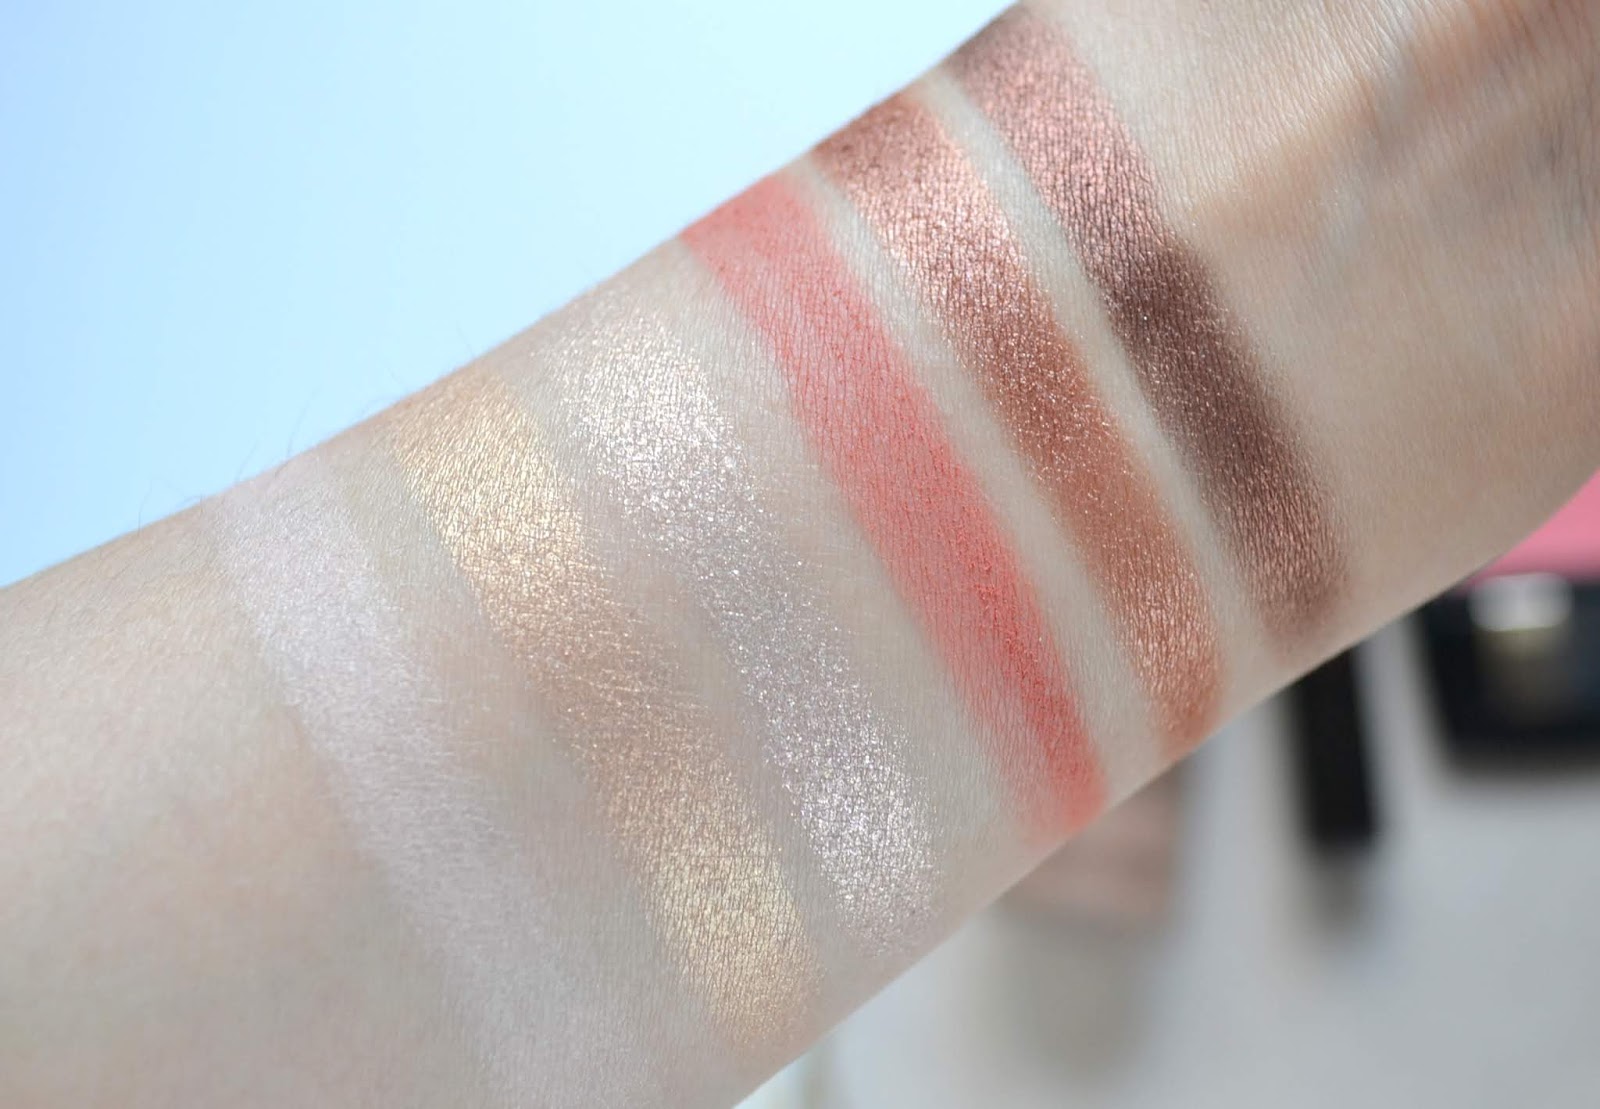 Urban Decay Naked Reloaded Palette Review and Swatches on Fair Skin